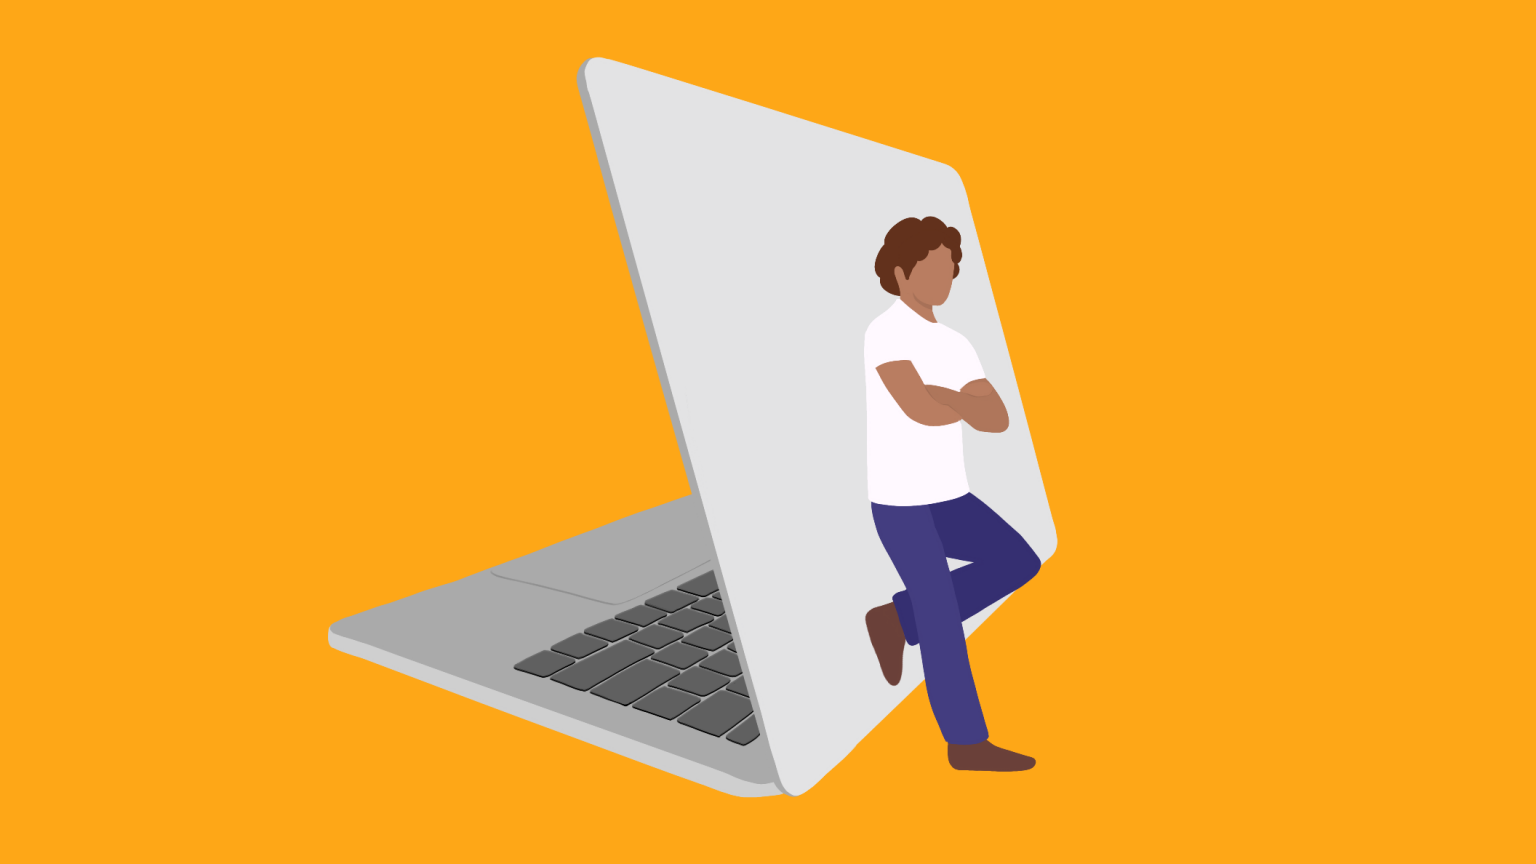 illustration of laptop and person leaning against it